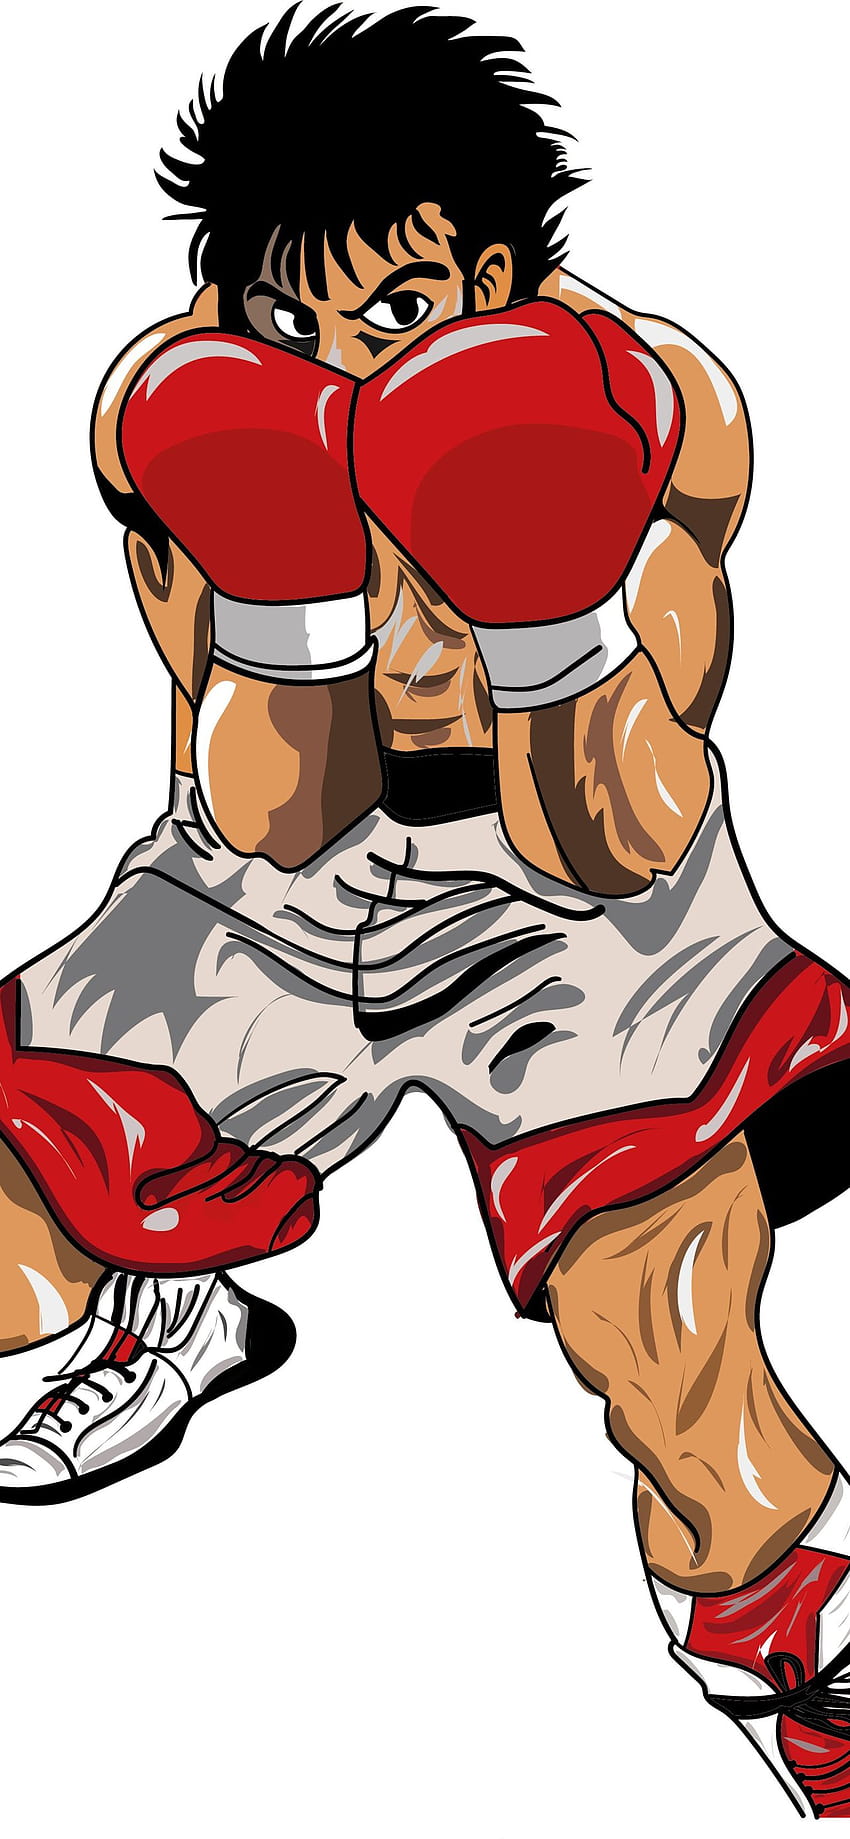 Boxing Anime: 20 Must-See Boxing Animes For Fans